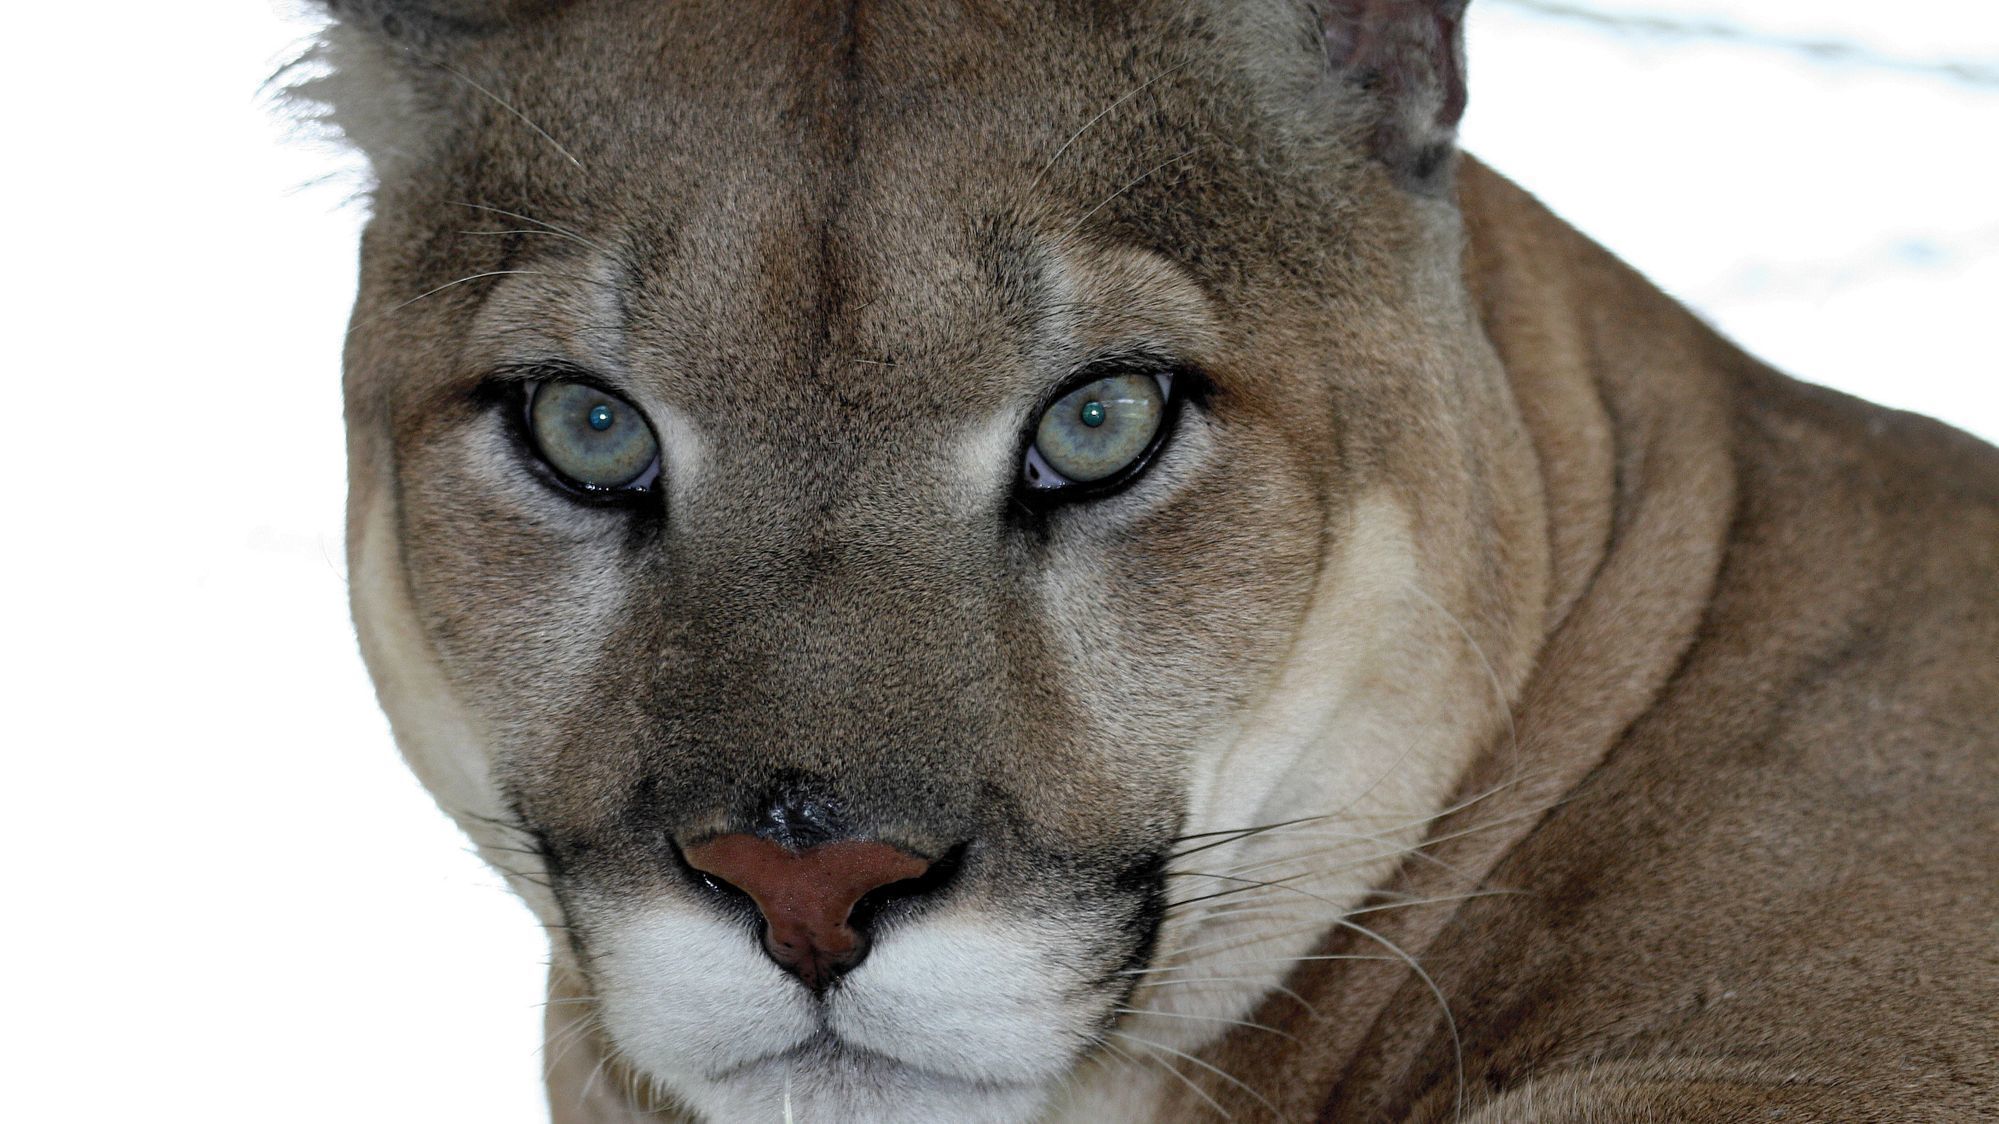 Stand up now for Florida î€€panthersî€\' protection Opinion - Sun Sentinel